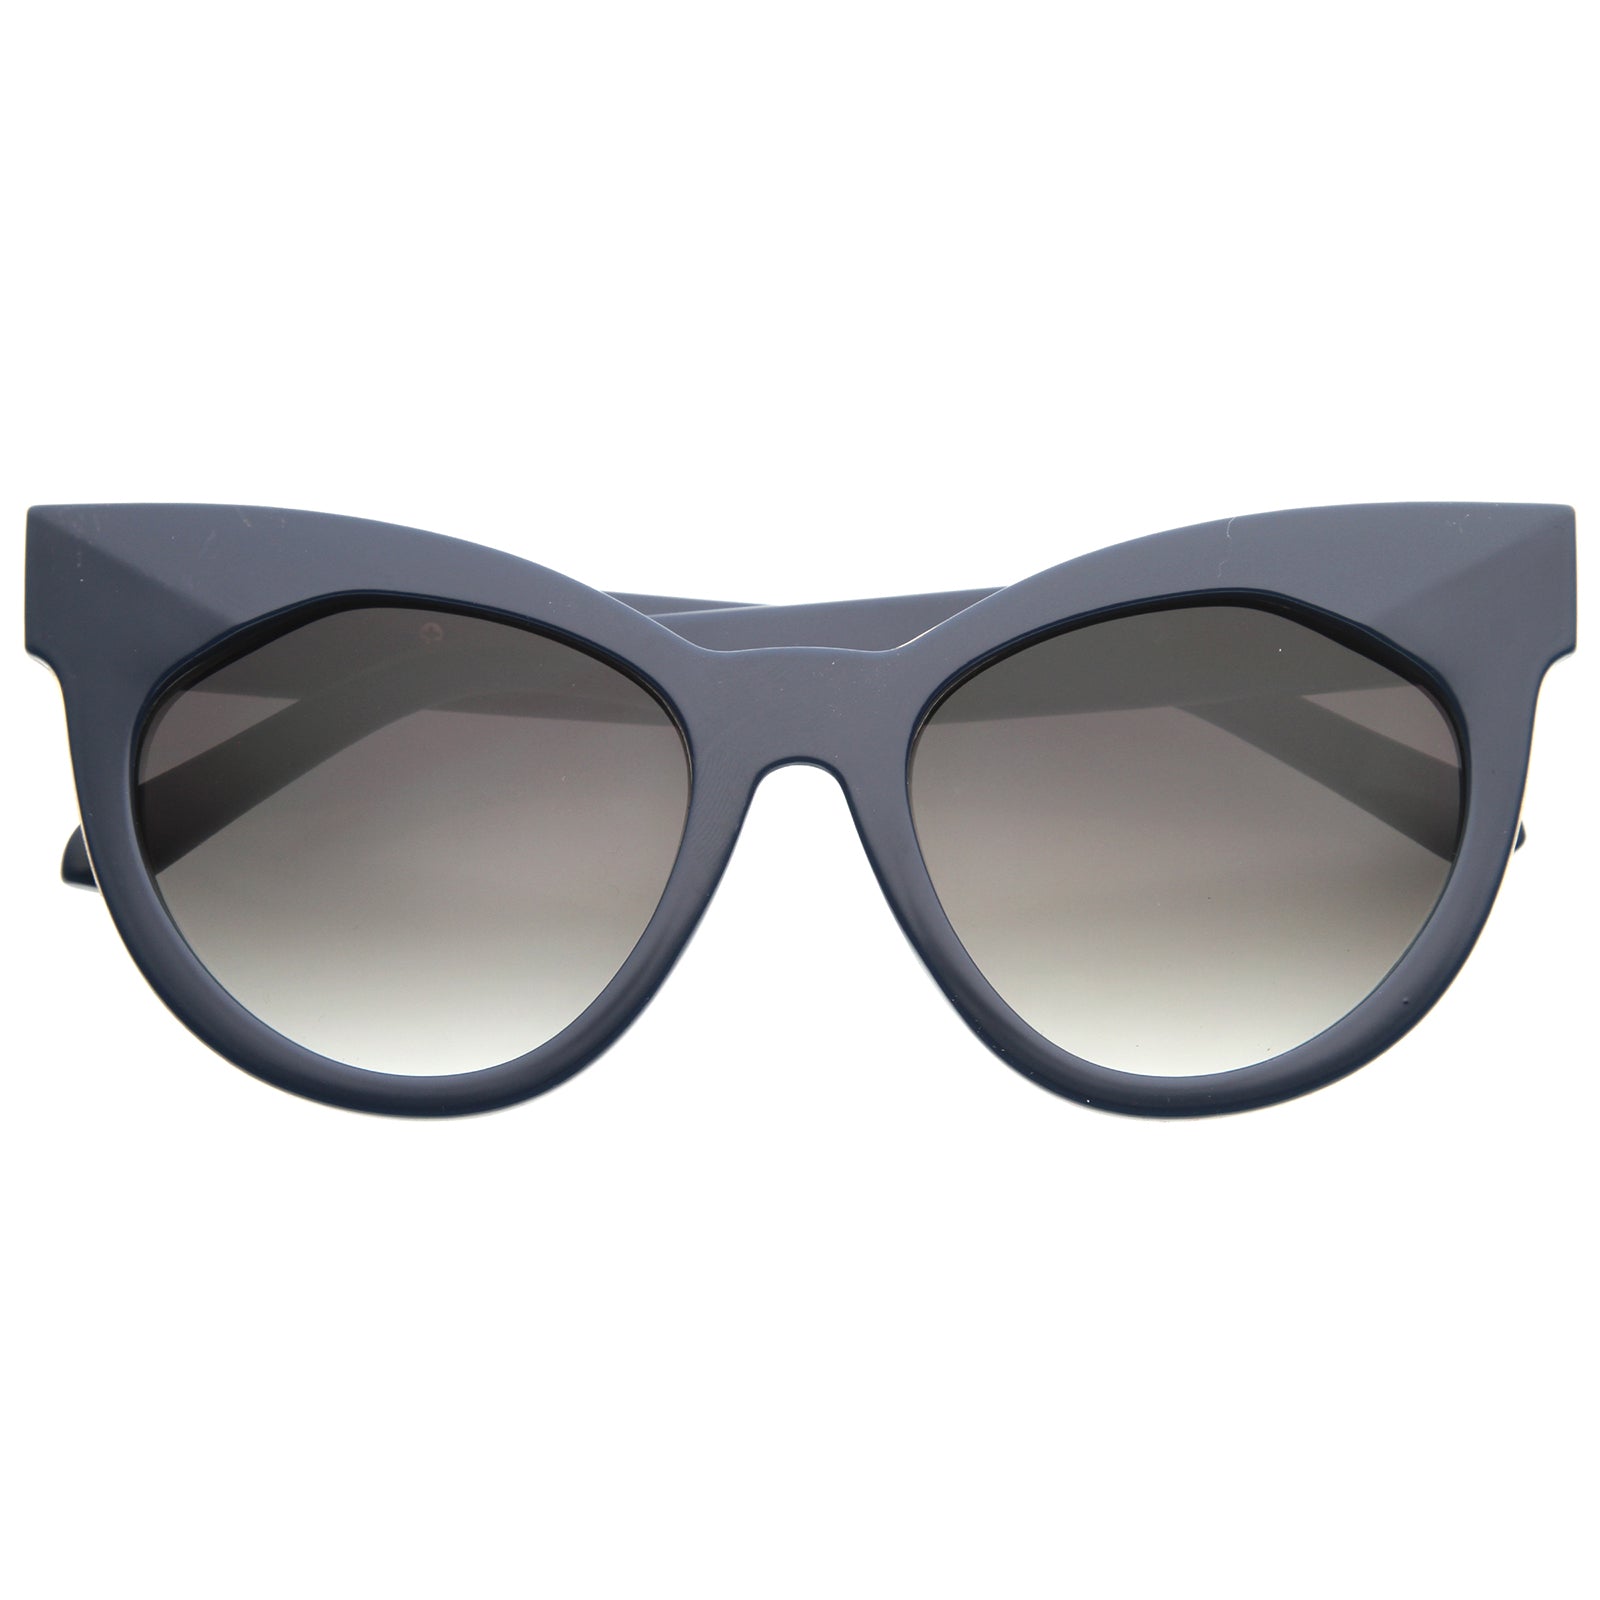 Clear Thick Geek-Chic Geometric Tinted Sunglasses